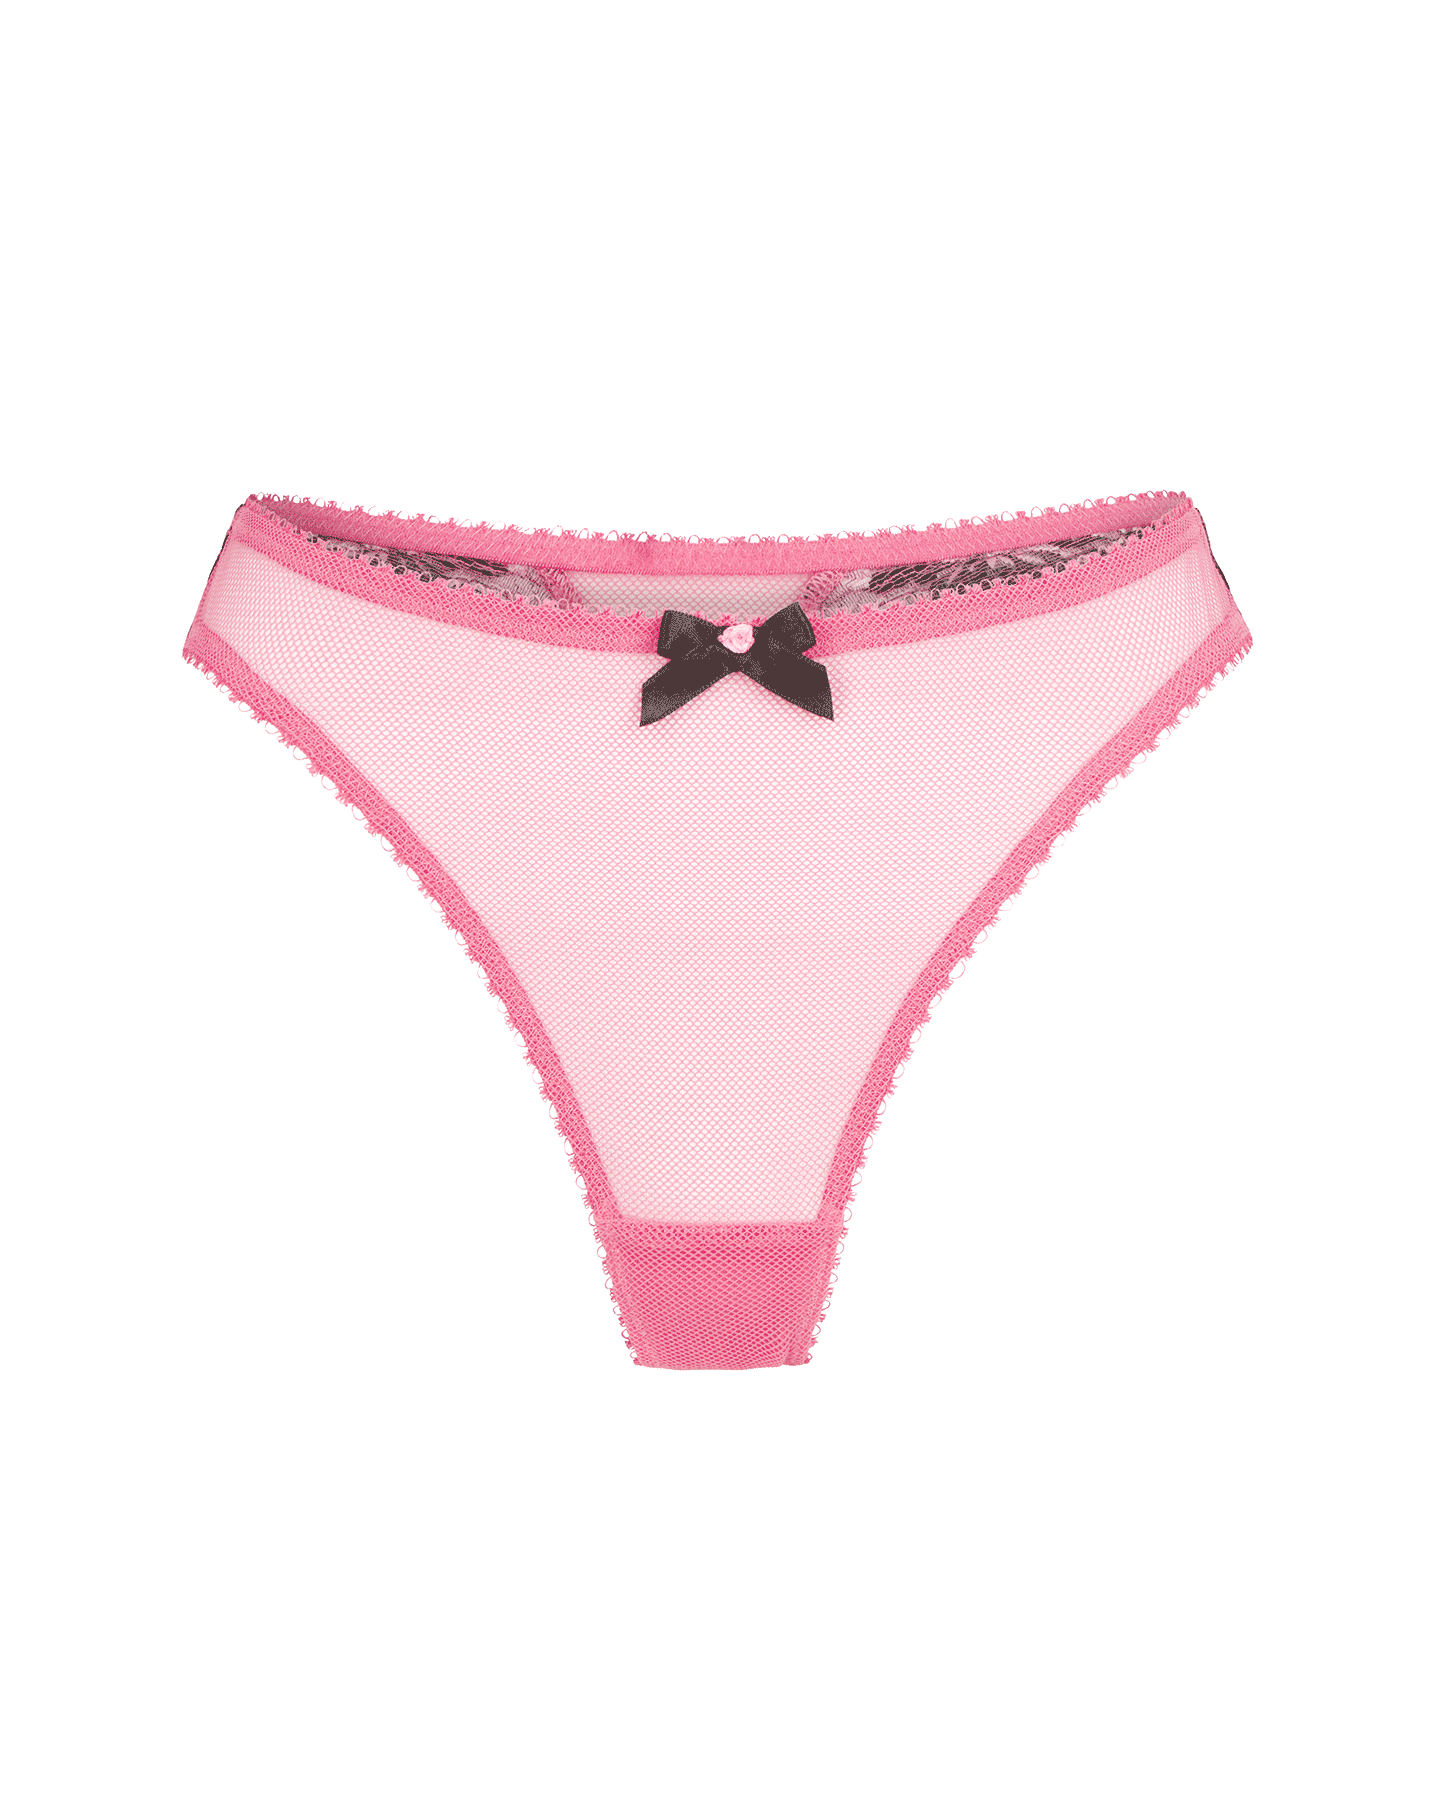 Yara 1 Thong in Pink/Black | By Agent Provocateur Outlet